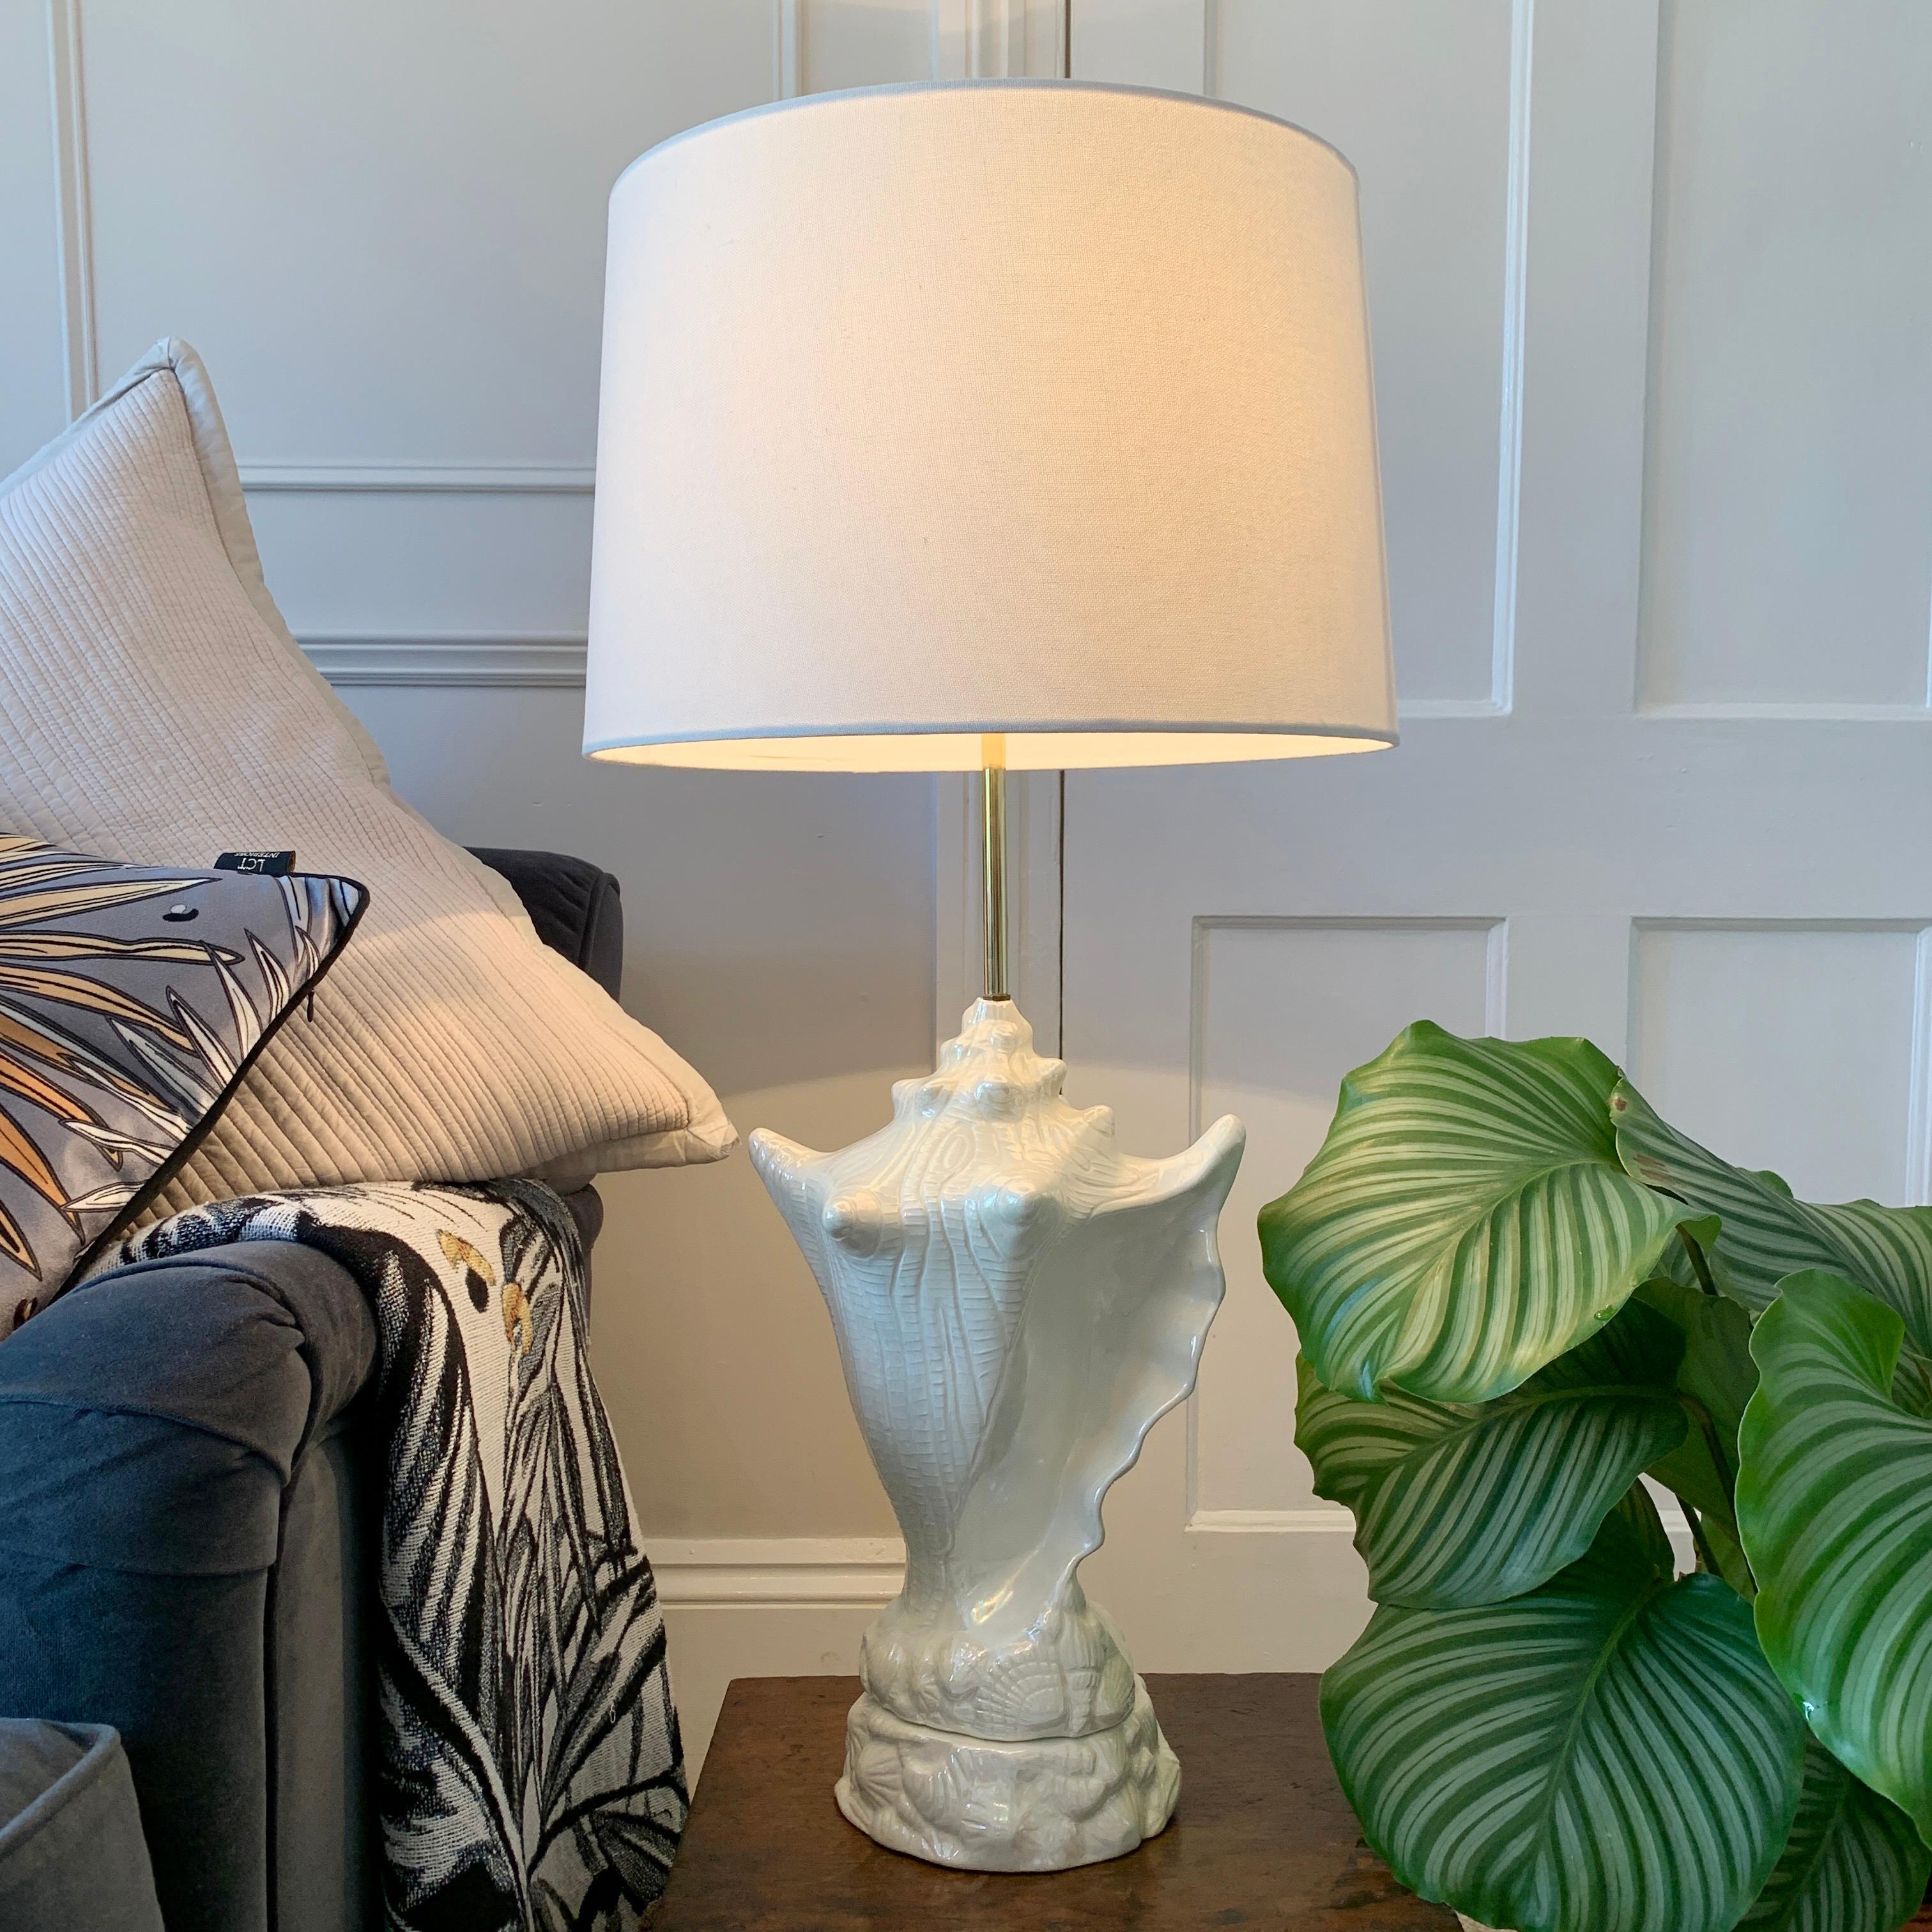 Fantastic mid century ceramic conch shell table lamp
C 1960's / 70's
This large sized ceramic conch shell is finished in an off white colour with iridescent glaze, the finish gives a soft rainbow of colour as the light catches it
The main conch